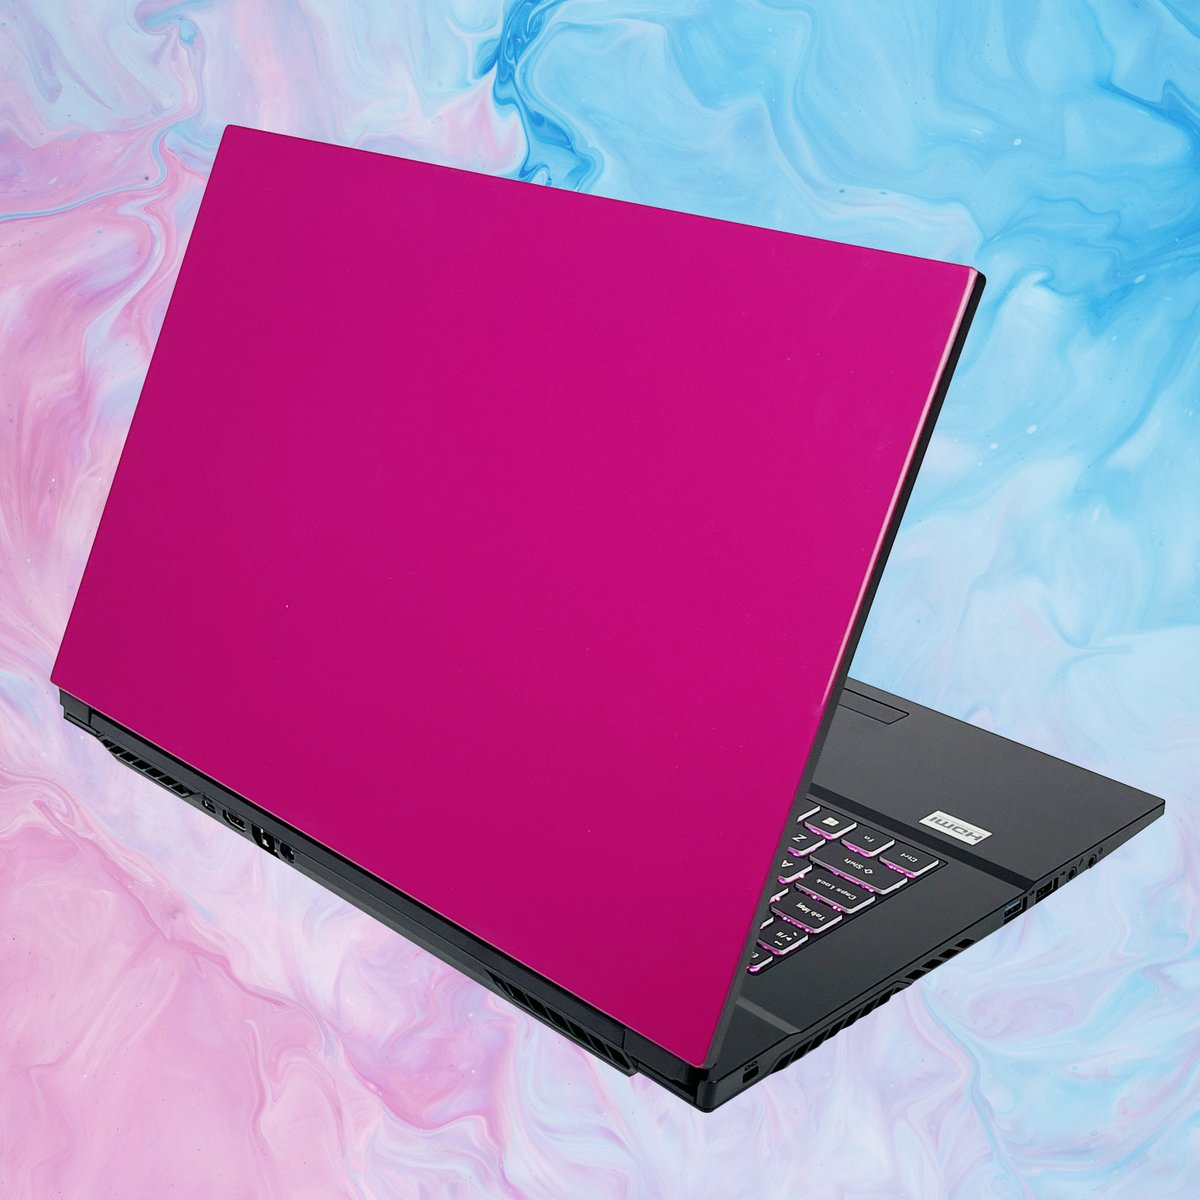 We love this pink custom laptop we were able to do! What color would you want your laptop in? #gaming #gaminglaptop #customcomputer